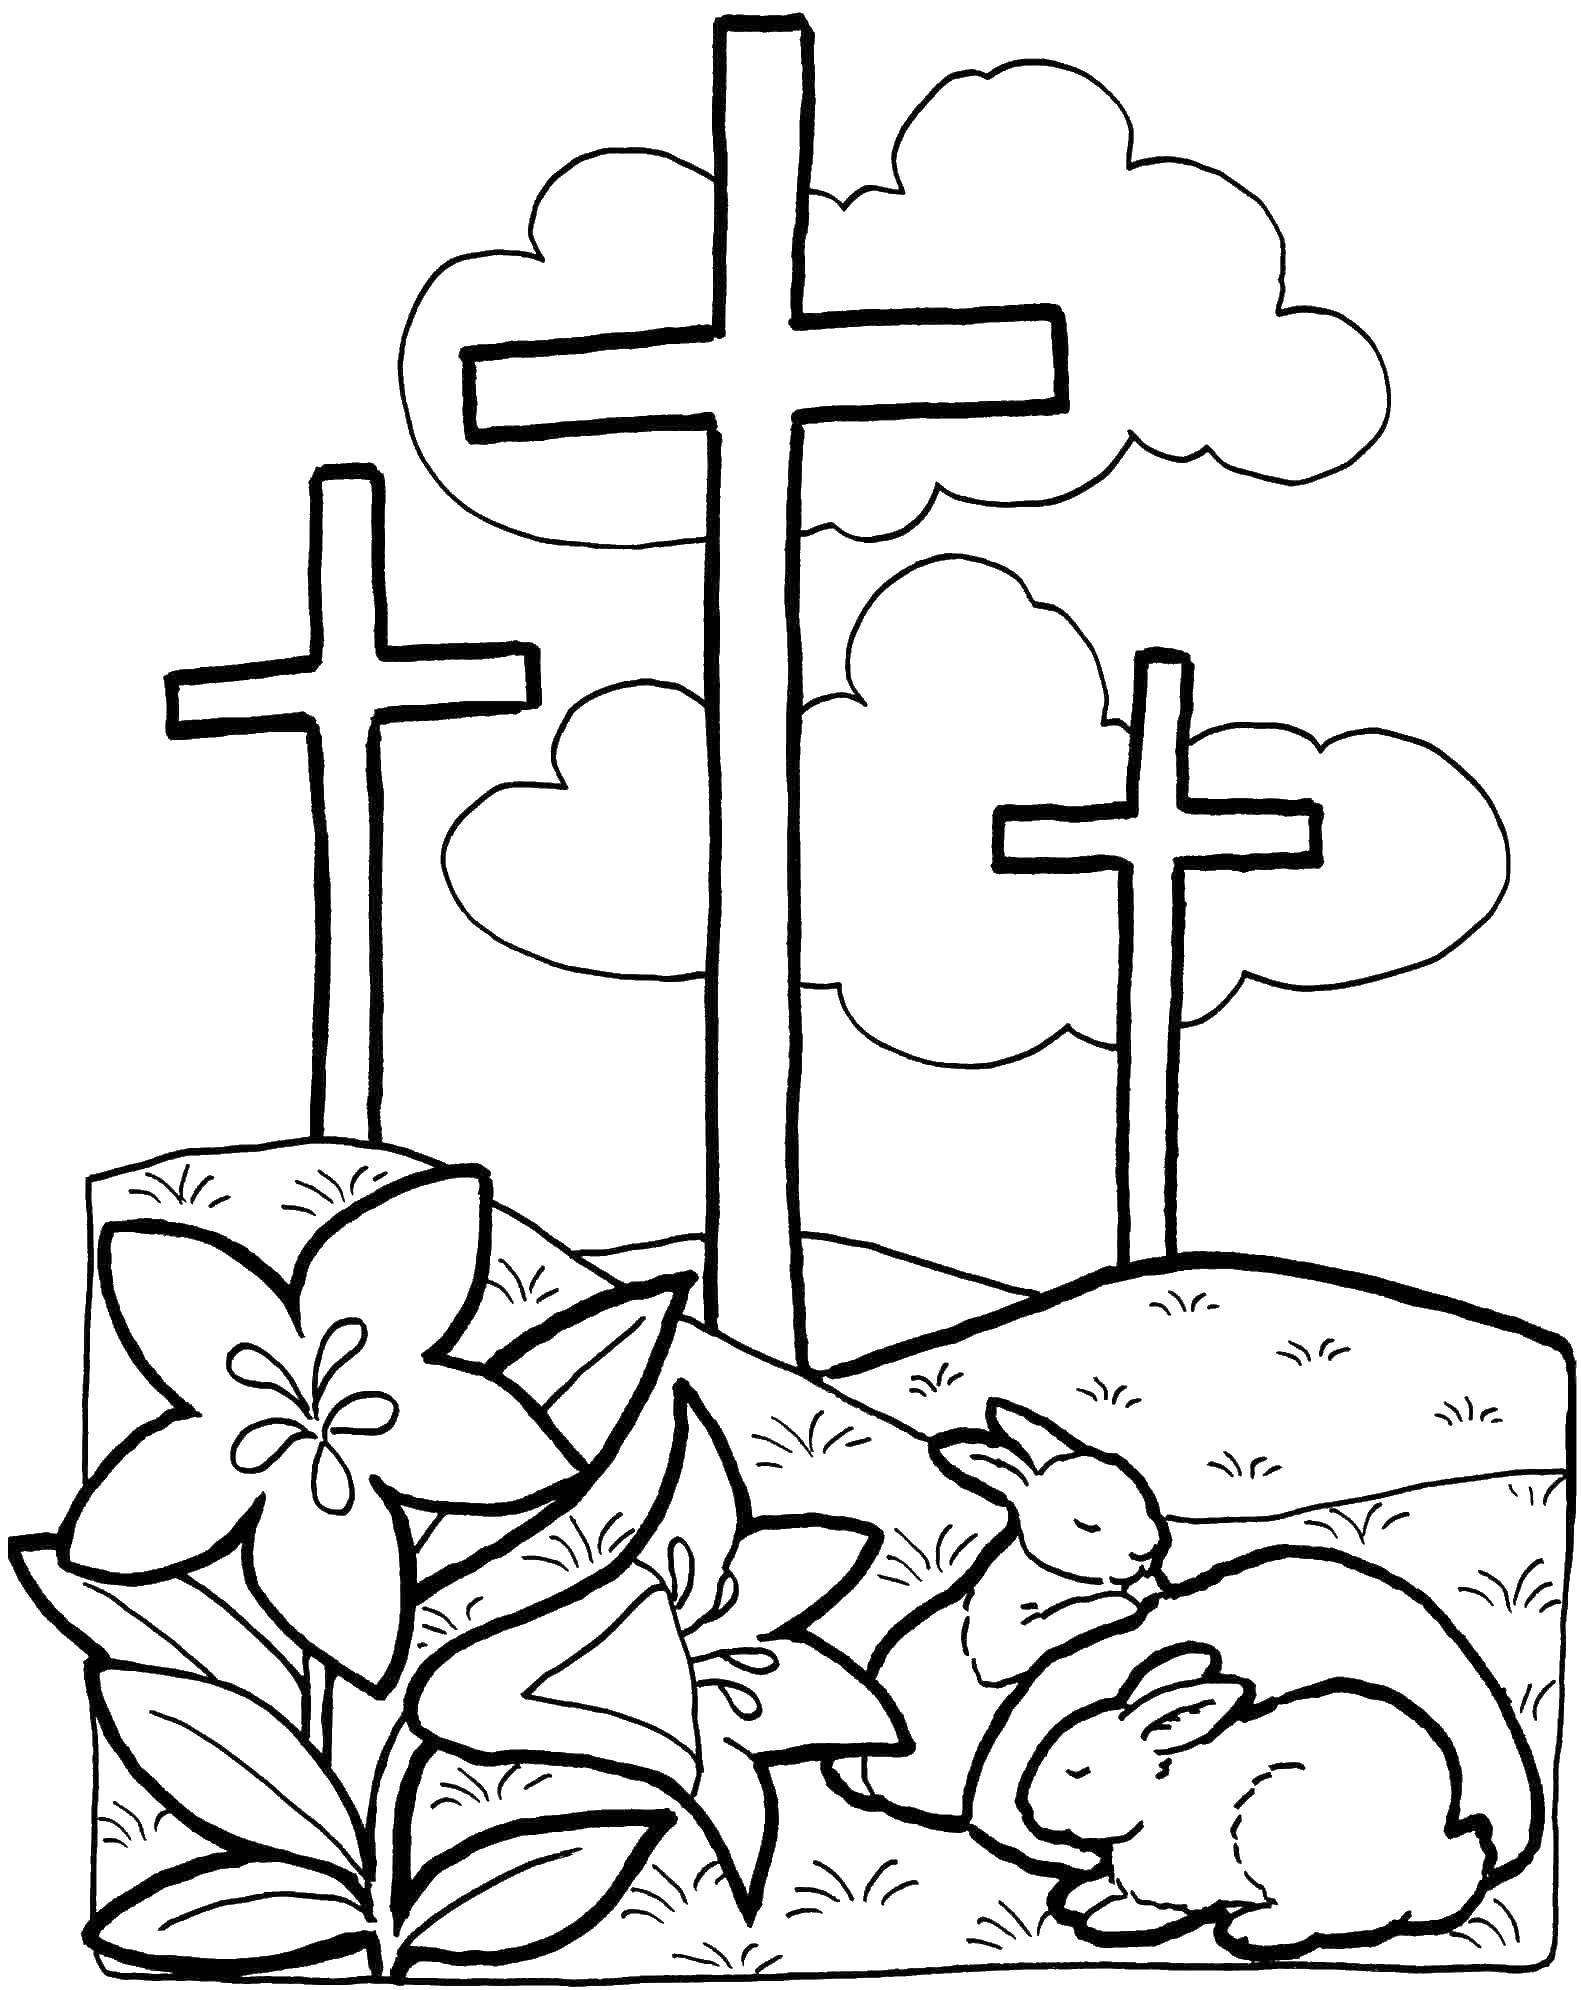 Coloring Cross flowers and rabbits. Category Cross. Tags:  cross.